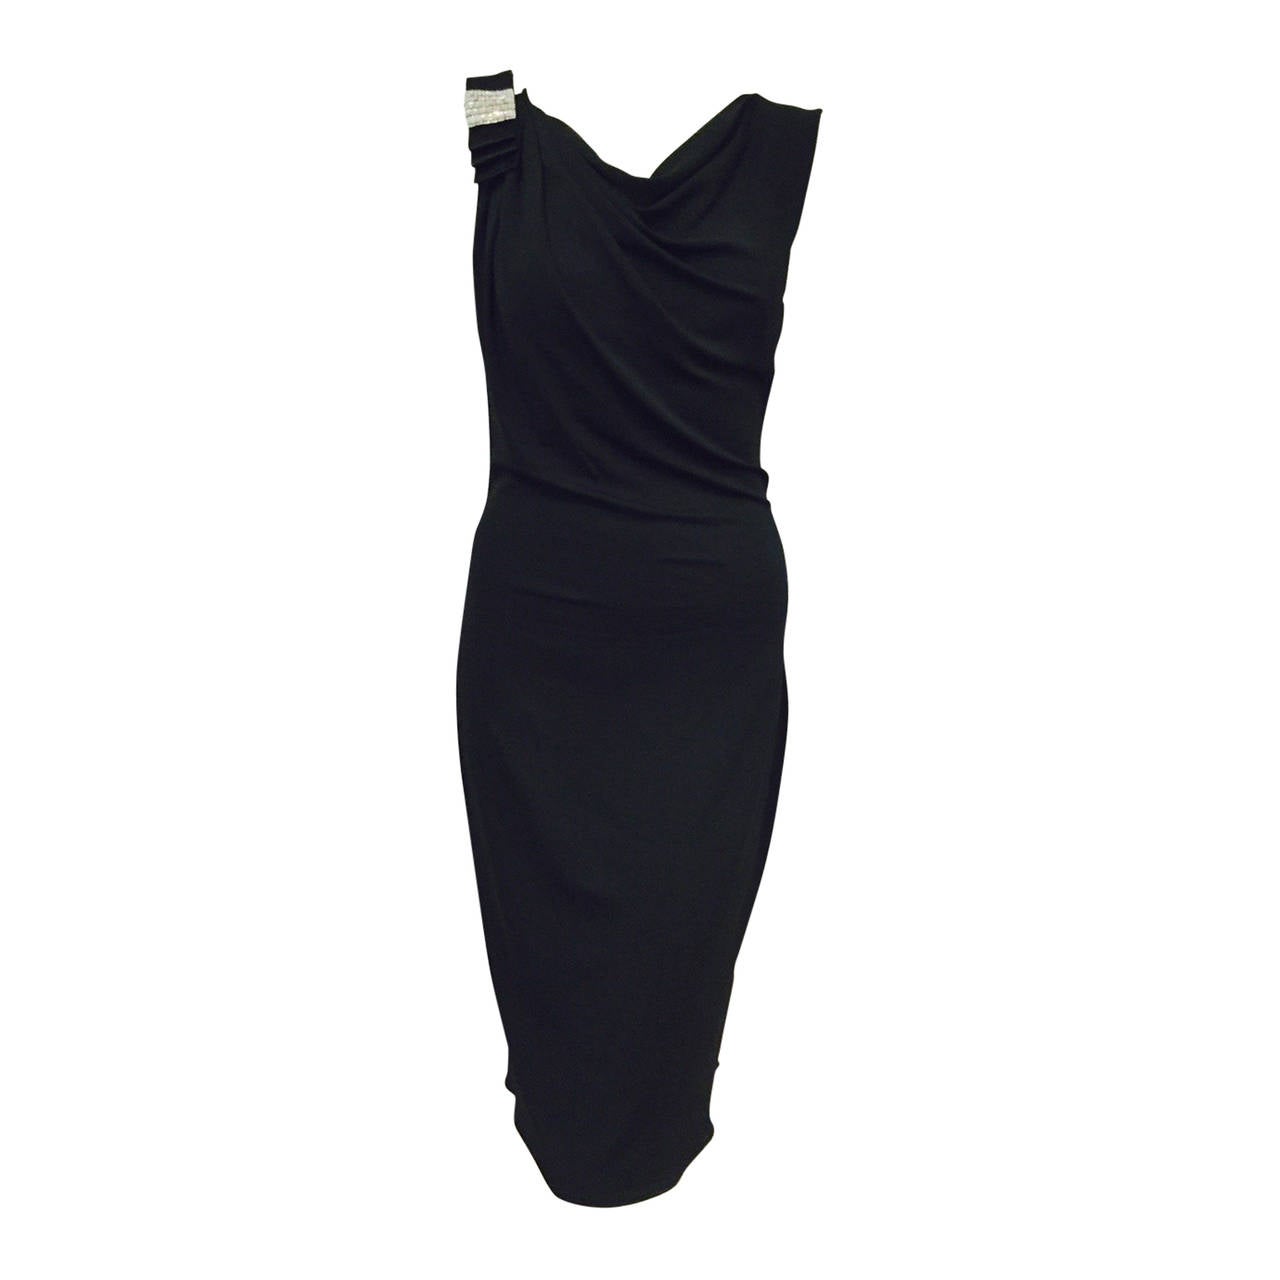 Beguiling Blumarine Sleeveless Jersey Cocktail Sheath For Sale